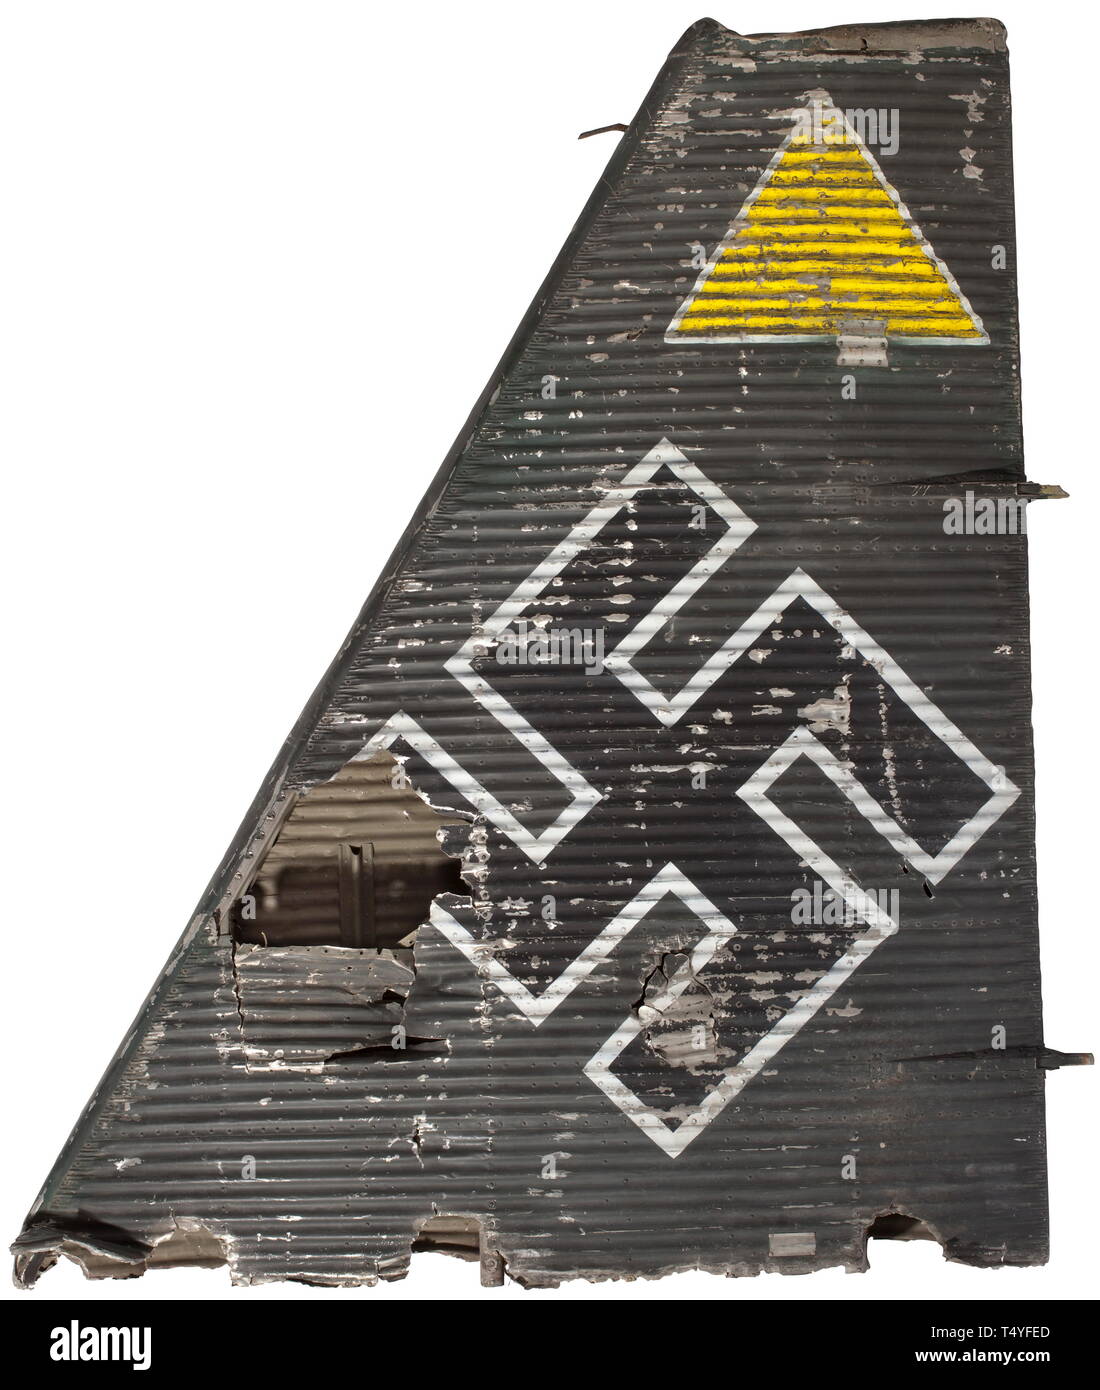 A Junkers JU-52 tail unit with tactical and national symbols. The tail unit of aluminium worked in multiple layers, multi-riveted, labelled and painted in typical Luftwaffe grey. A national emblem at the middle, above which is a tactical symbol for the third aircraft of the squadron. Riveted-on type plate with designation '010 - 1508 - mdq'. Marks of age and damage. Dimensions ca. 180 x 210 x 35 cm, weight ca. 20 kg. In 1944, this aircraft was forced to make an emergency landing in the vicinity of Salzburg, and its components were used by the civilian population after the d, Editorial-Use-Only Stock Photo